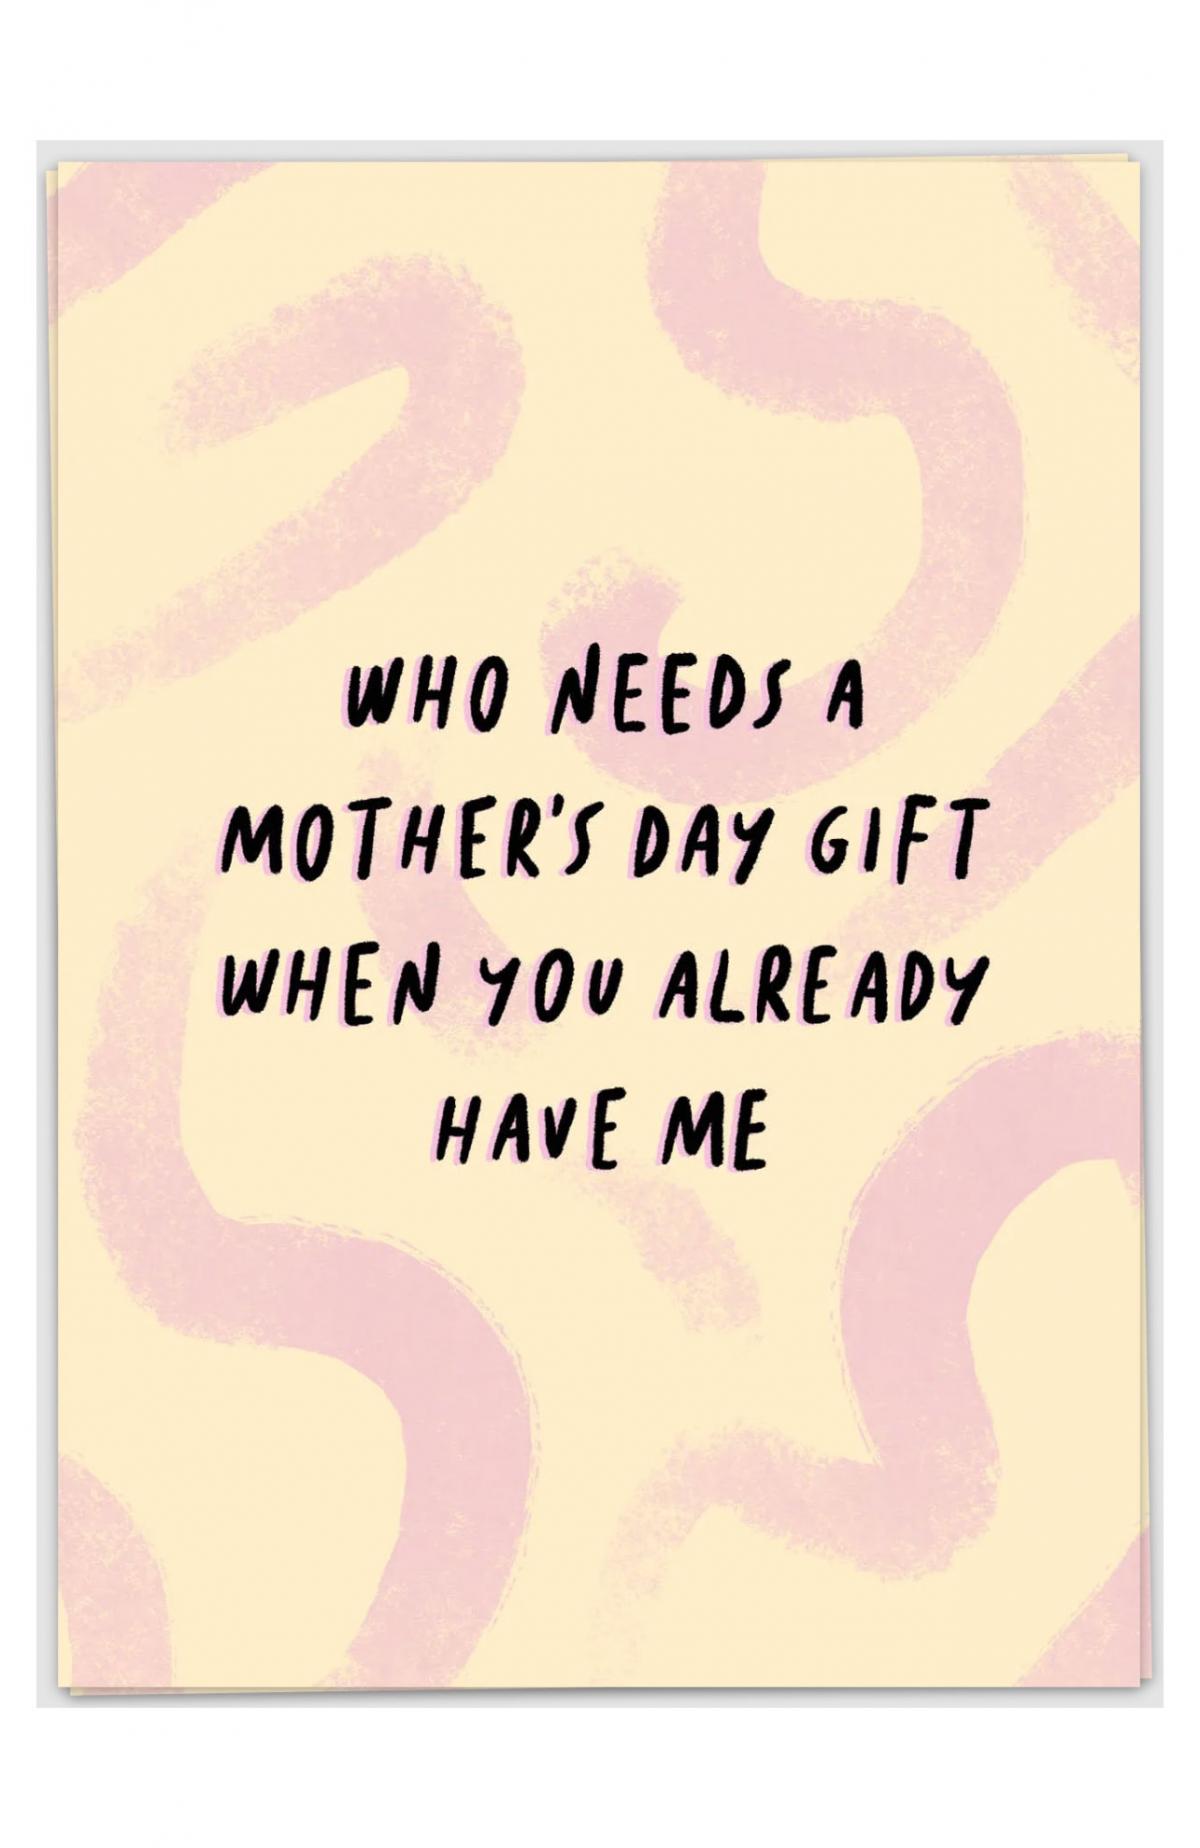 'Who needs a mother's day gift when you already have me?'